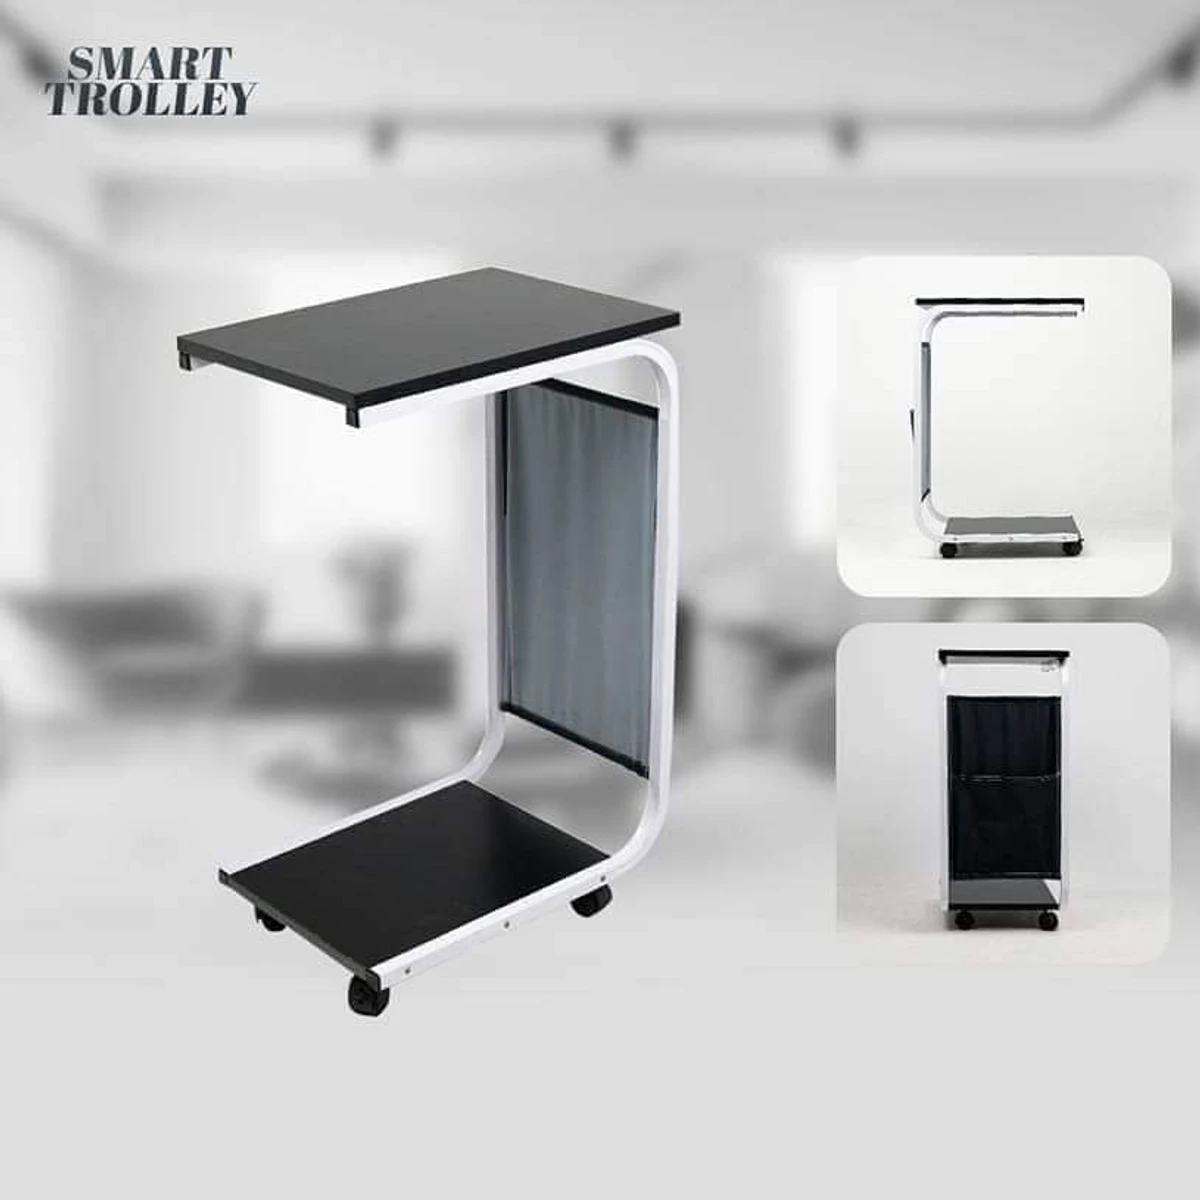 Multi-Purpose Movable Tray Table